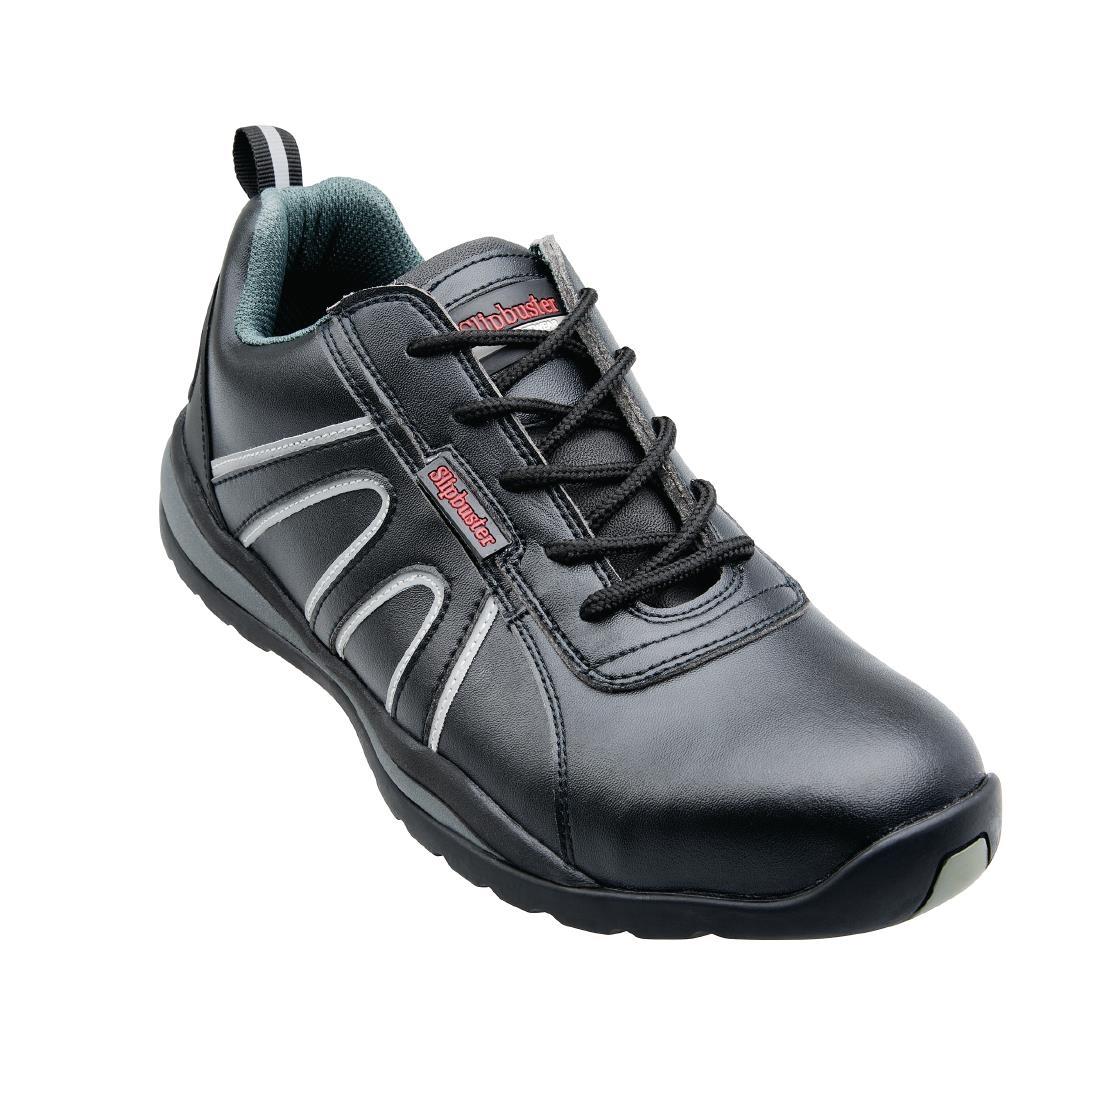 Slipbuster Safety Trainers Black 44 - A708-44  - 5